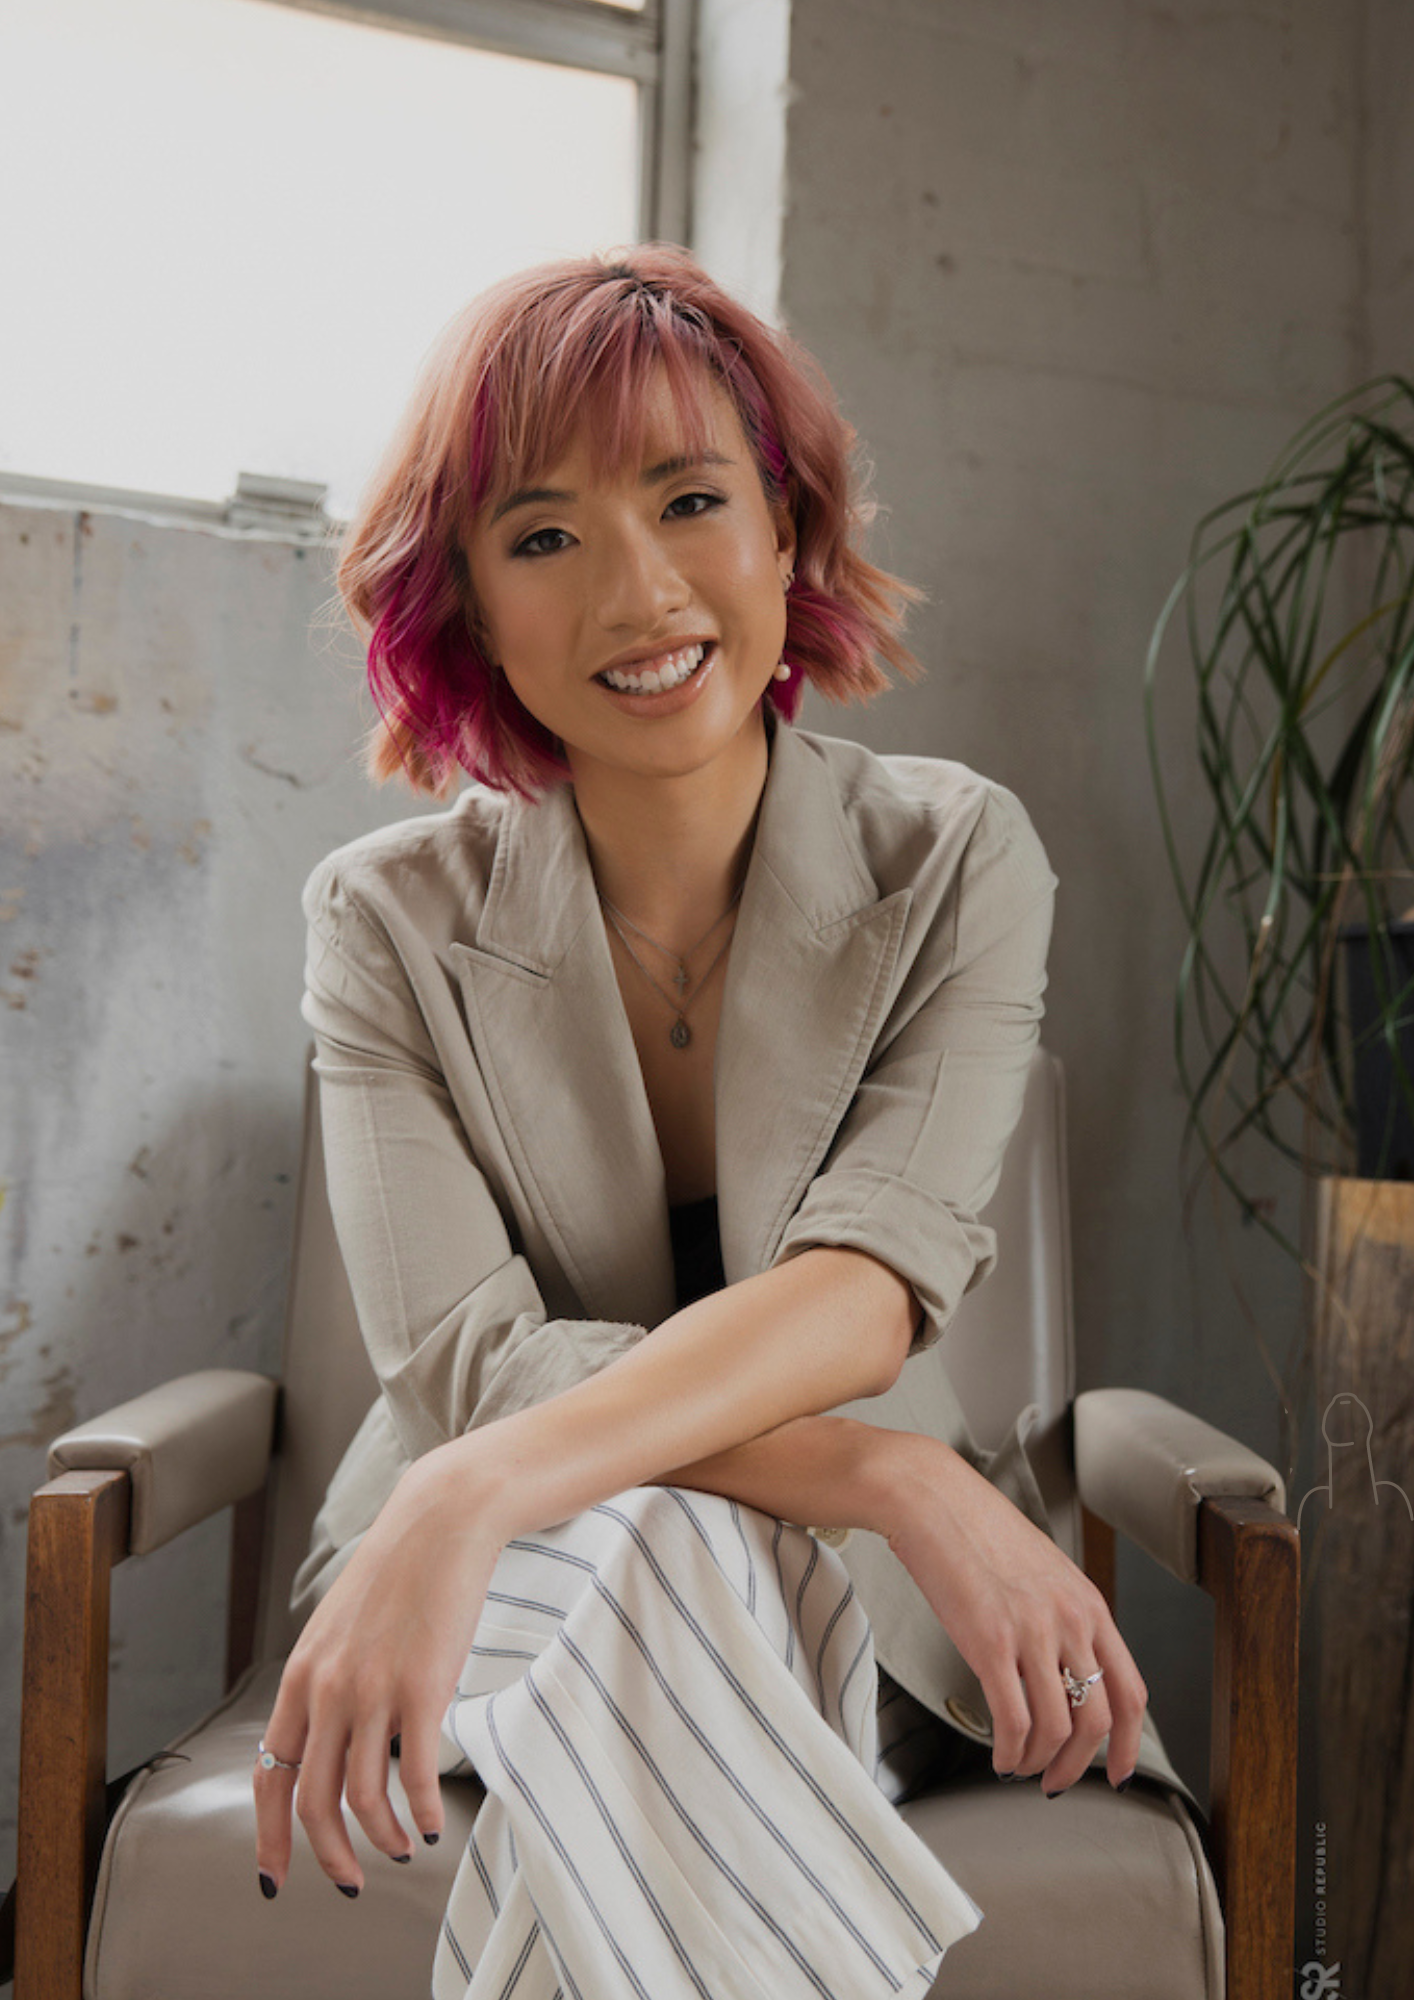 Image of a Chinese Australian woman with pink hair in a grey blazer, sitting relaxed and smiling on a chair.